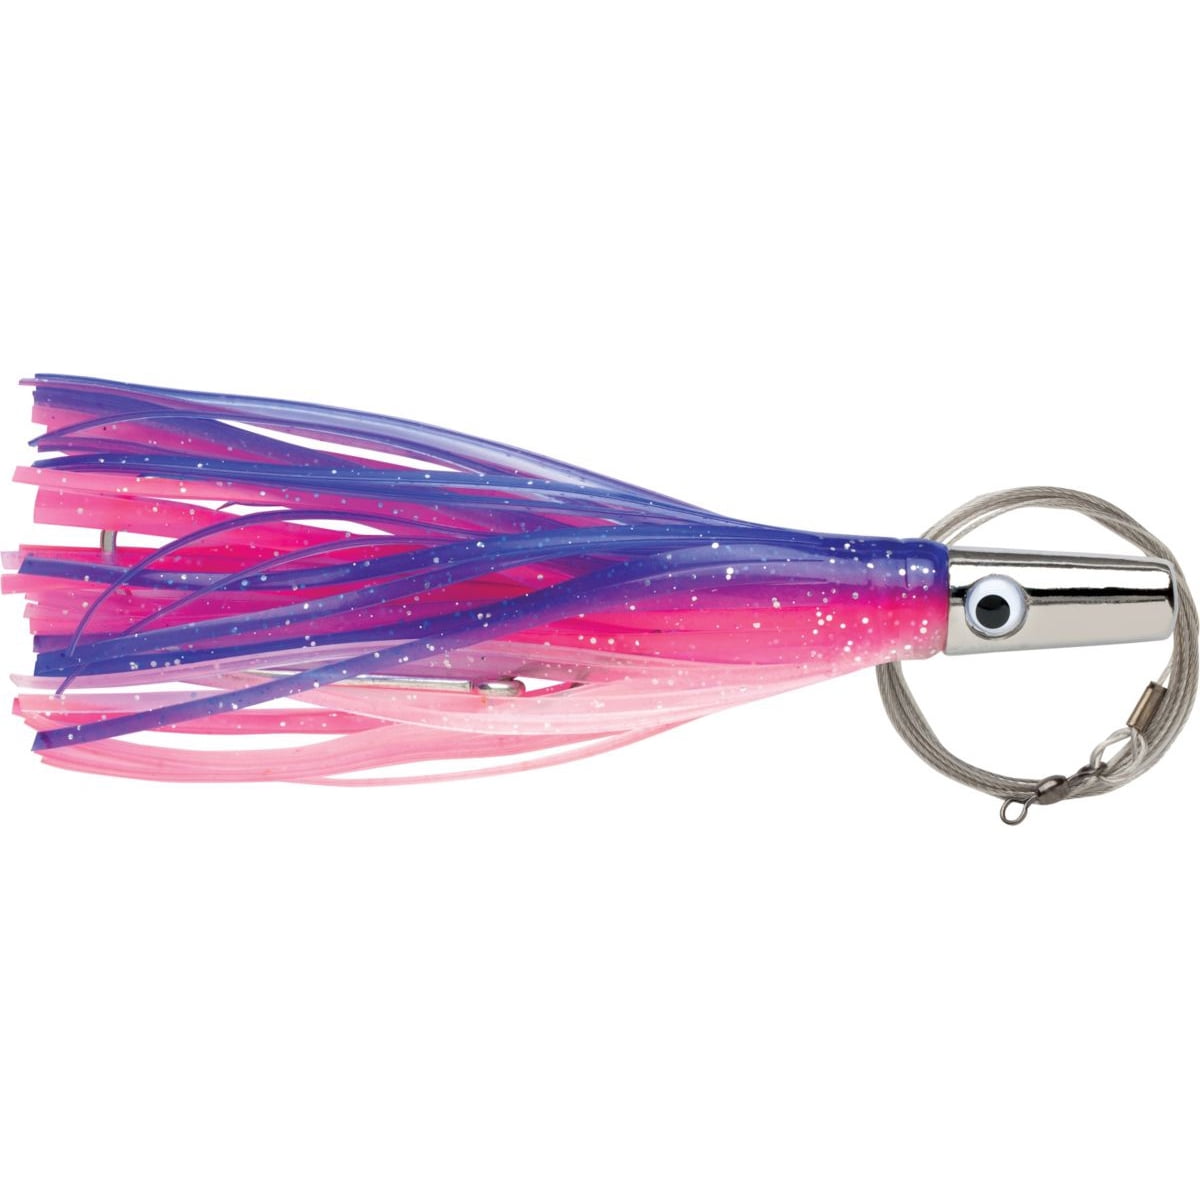 Williamson Wahoo Catcher Rigged 6 Fishing Lure - Blue/Pink/Silver 